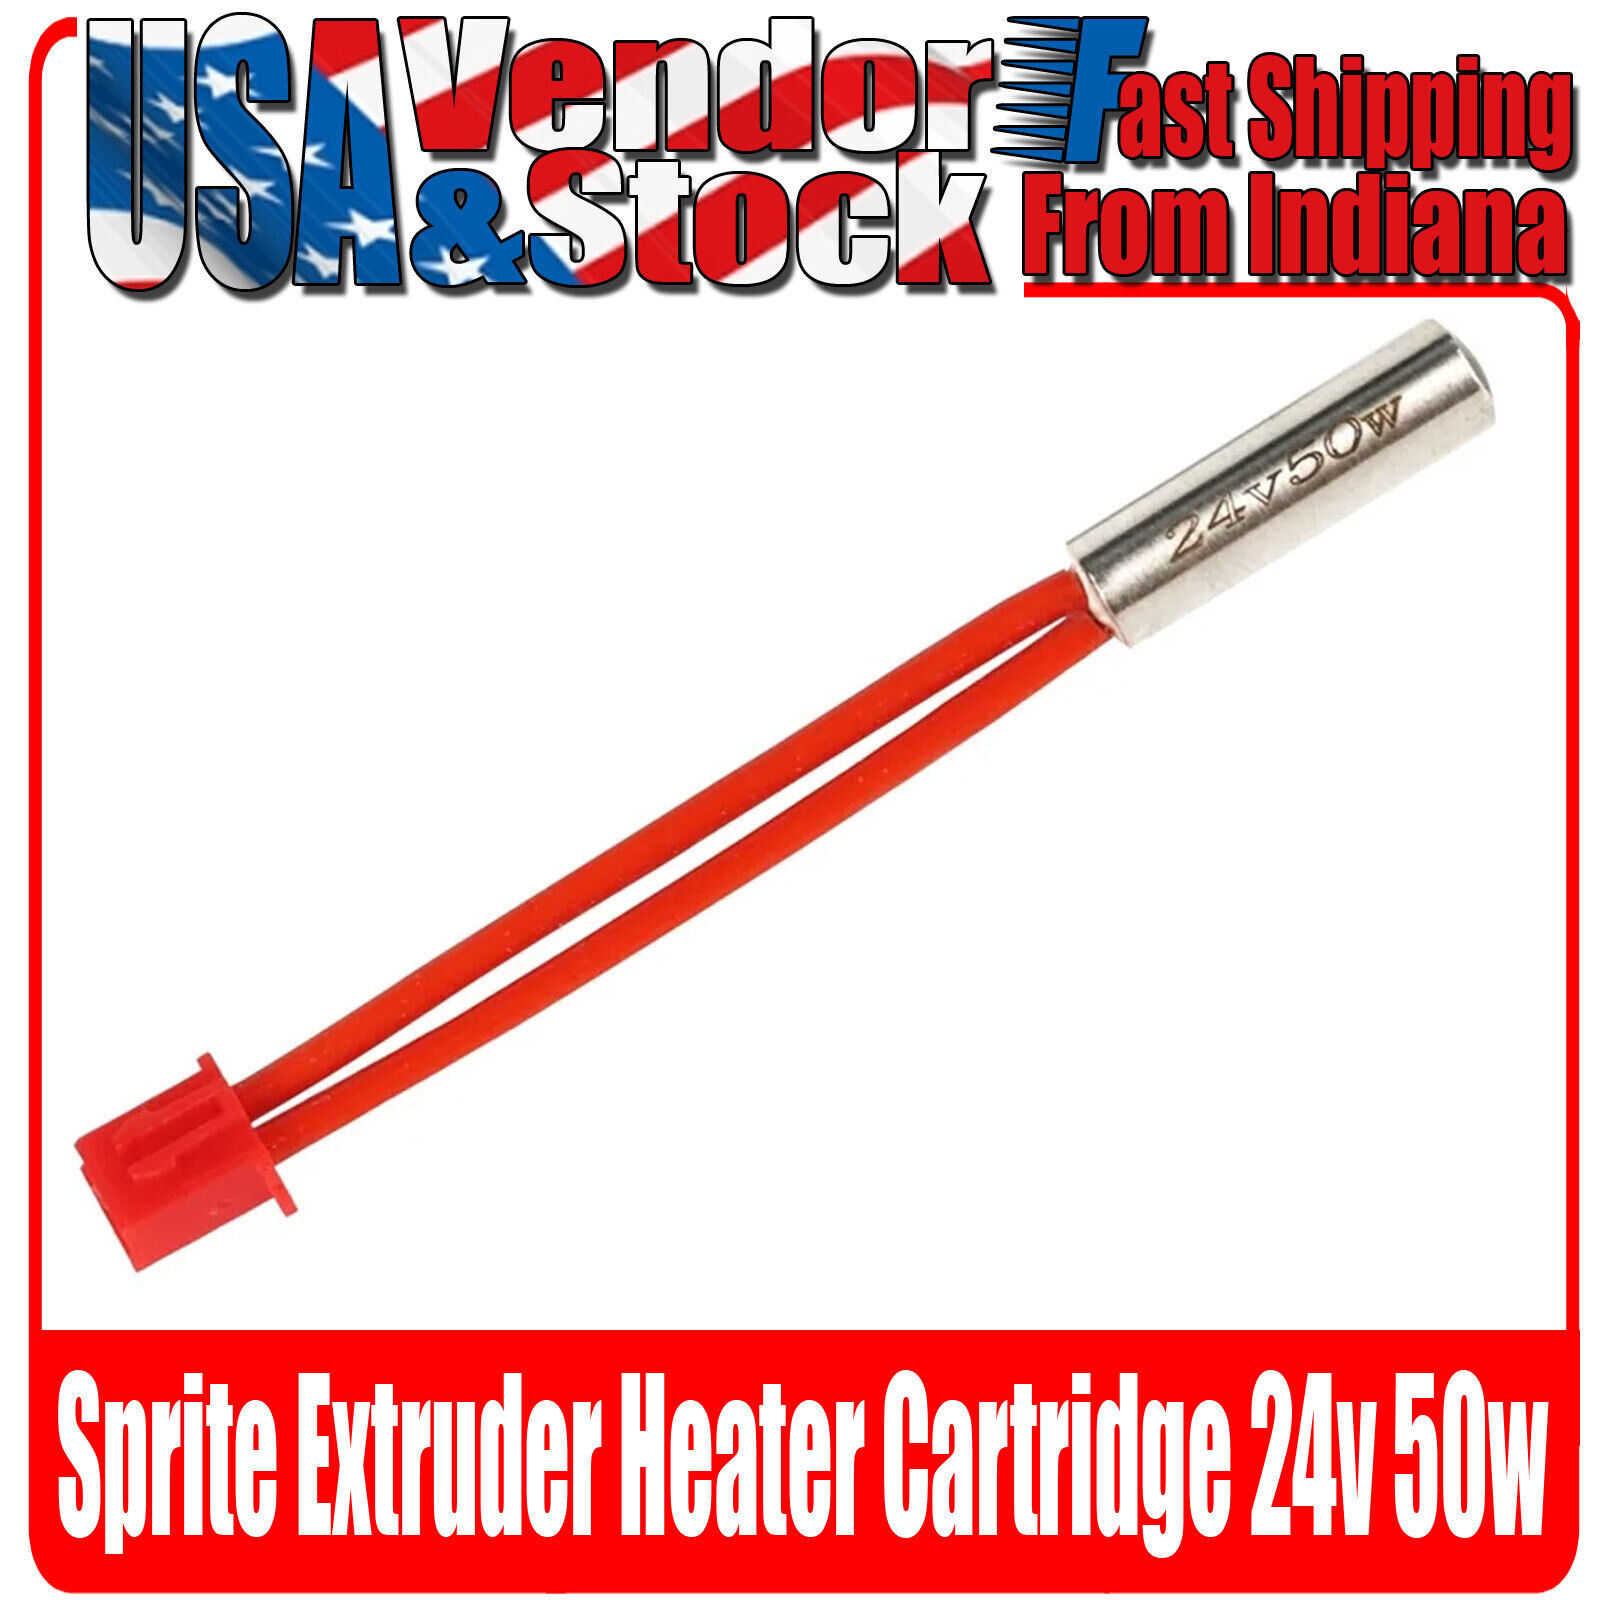 Creality 3D S1 Sprite Extruder Heater Cartridge 24v 50w Upgrade for Hotend